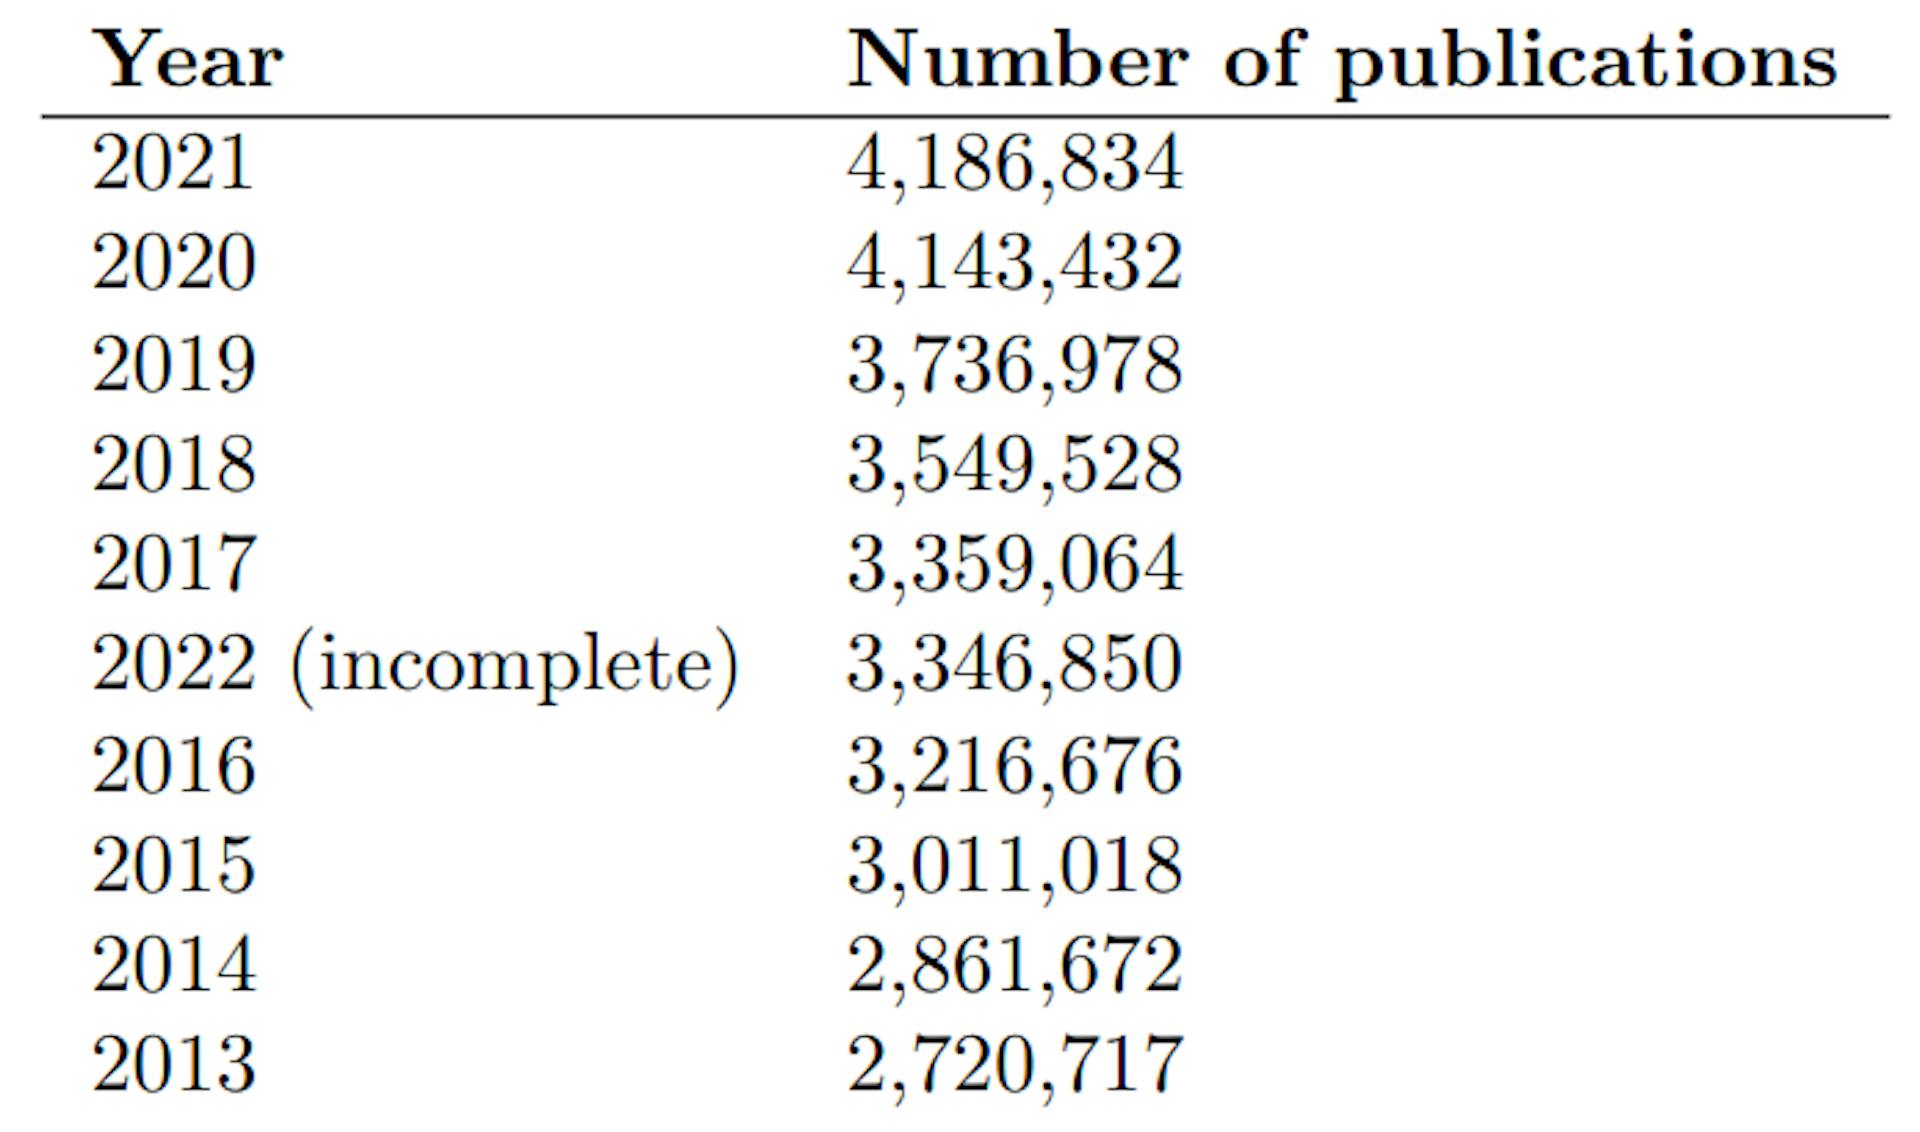 Table 6: Top ten years of publication by the number of publications in that year